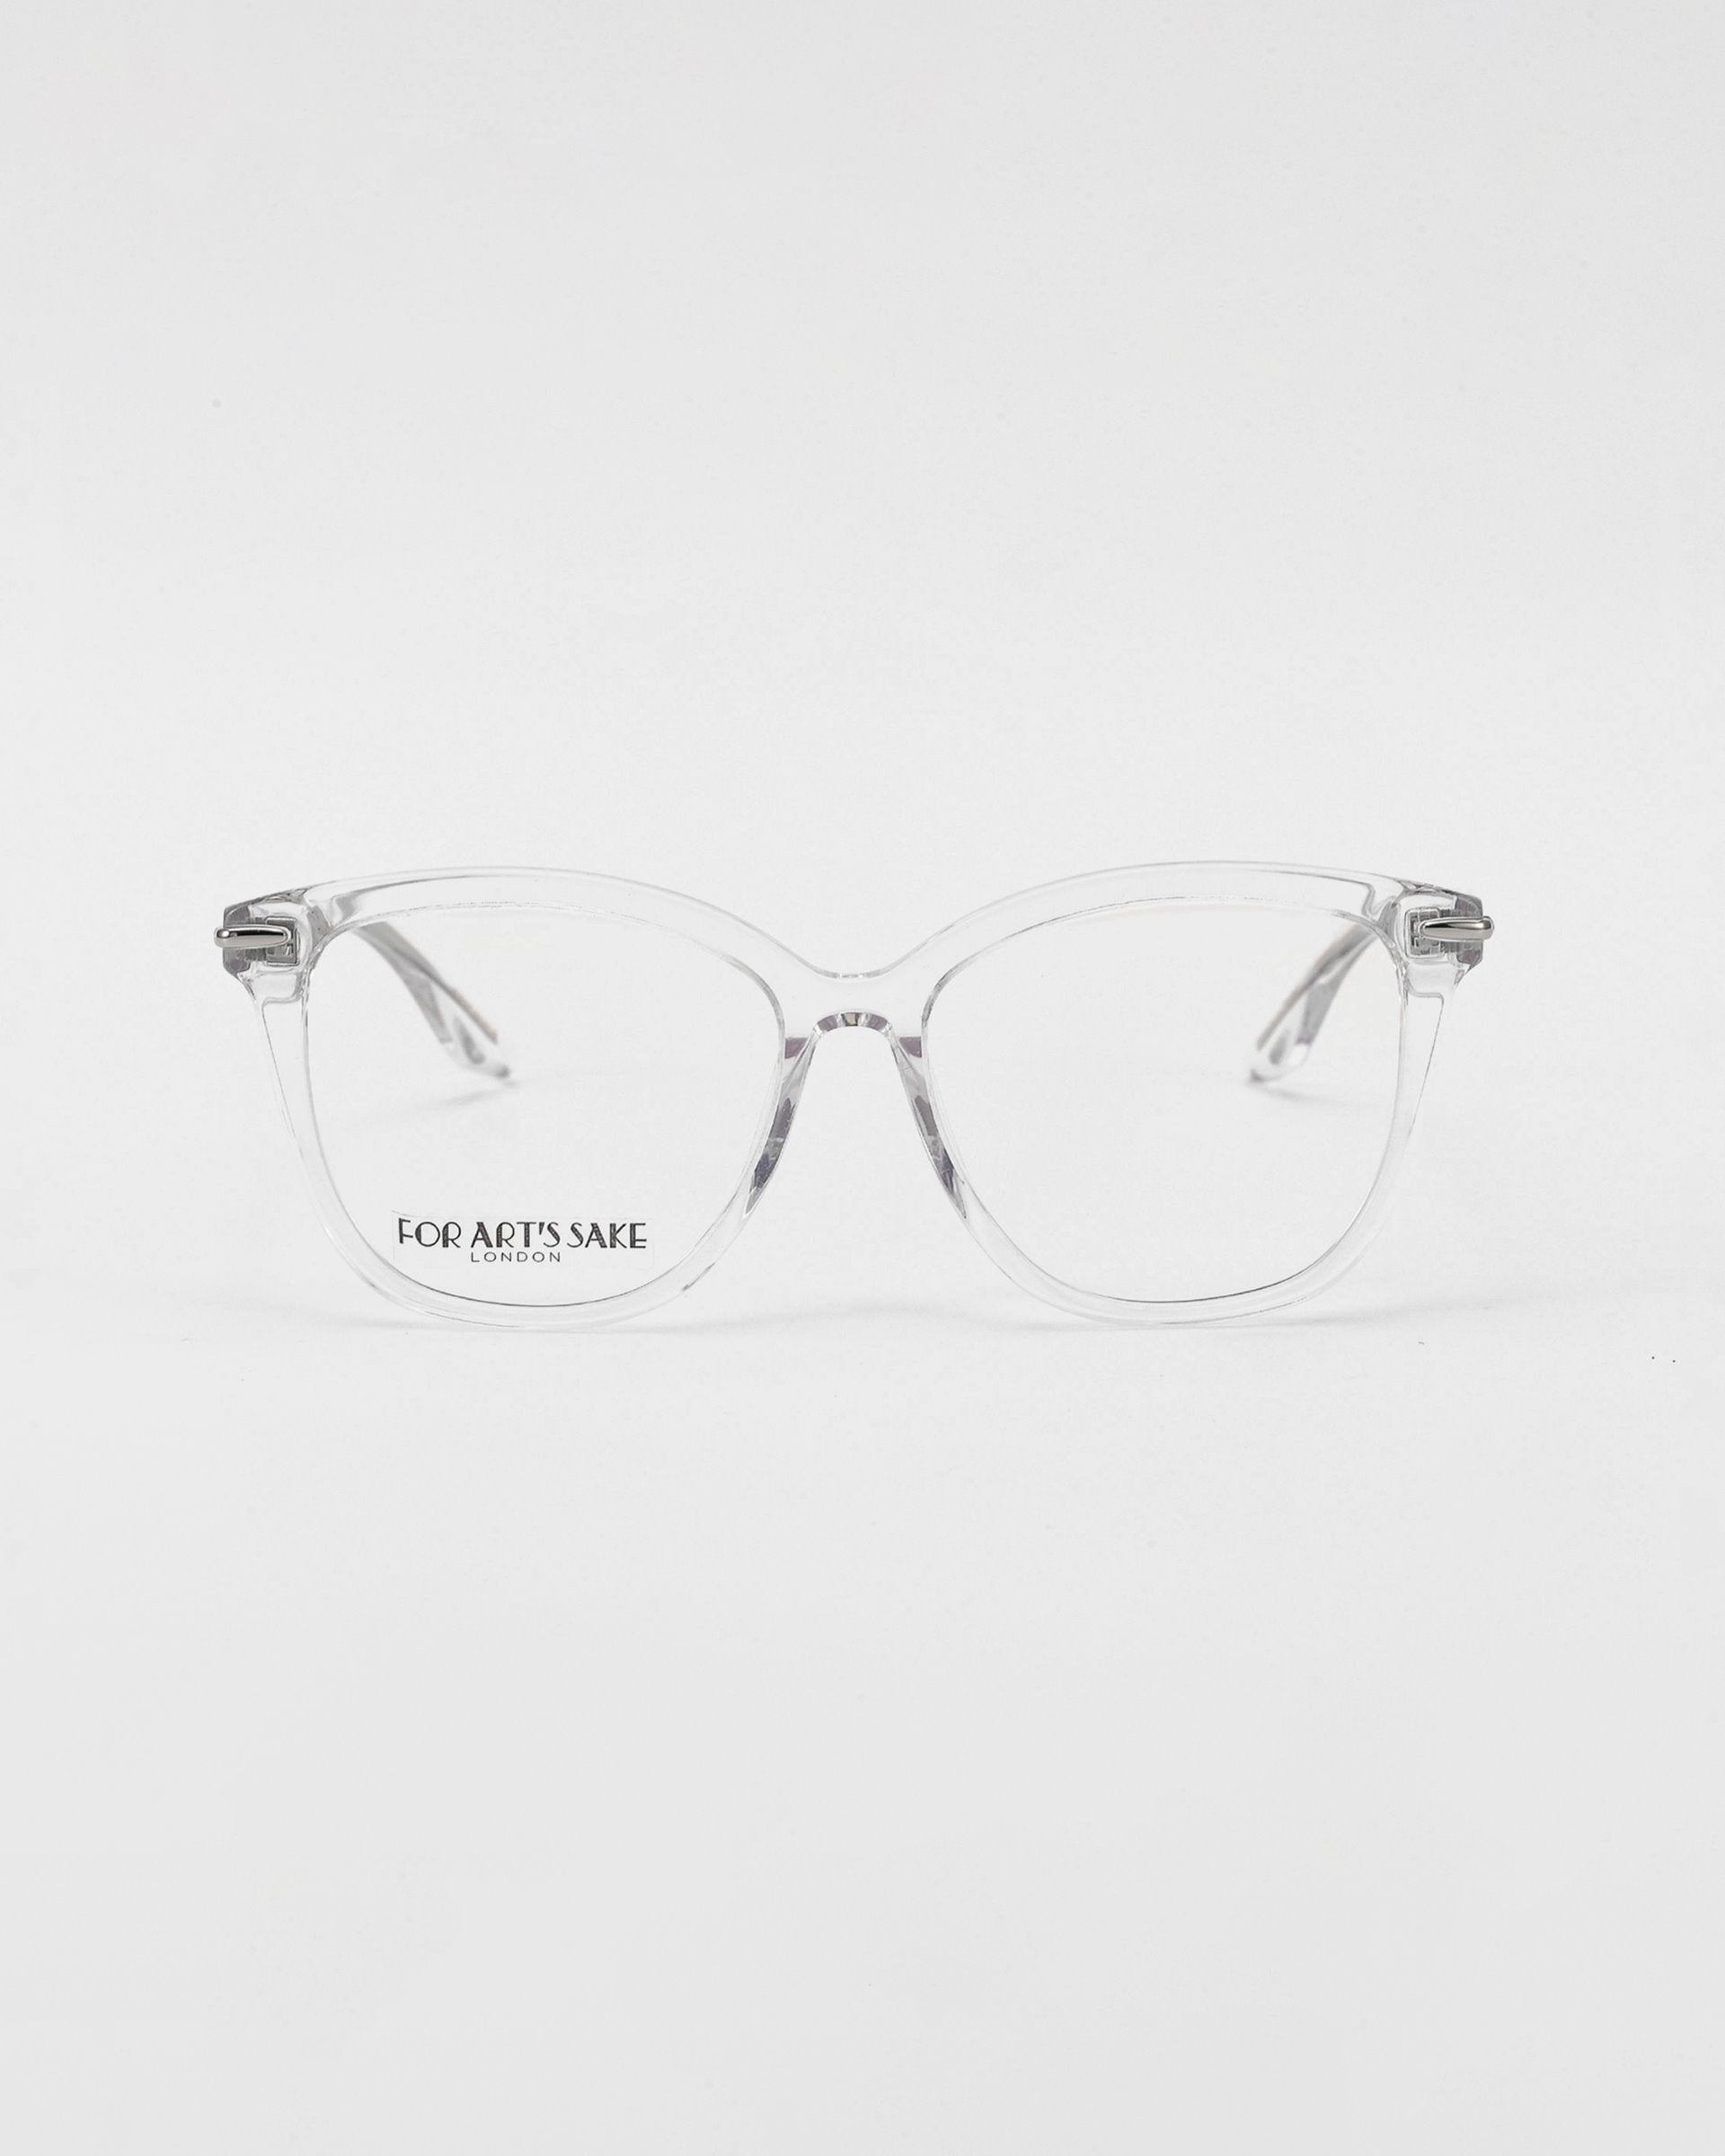 A pair of transparent For Art&#39;s Sake® optical glasses with rectangular lenses is centered against a plain white background. The text &quot;FOR ART&#39;S SAKE&quot; appears on one lens near the bridge. The Cadenza glasses have a minimalist and modern design, offering an option for prescription service.